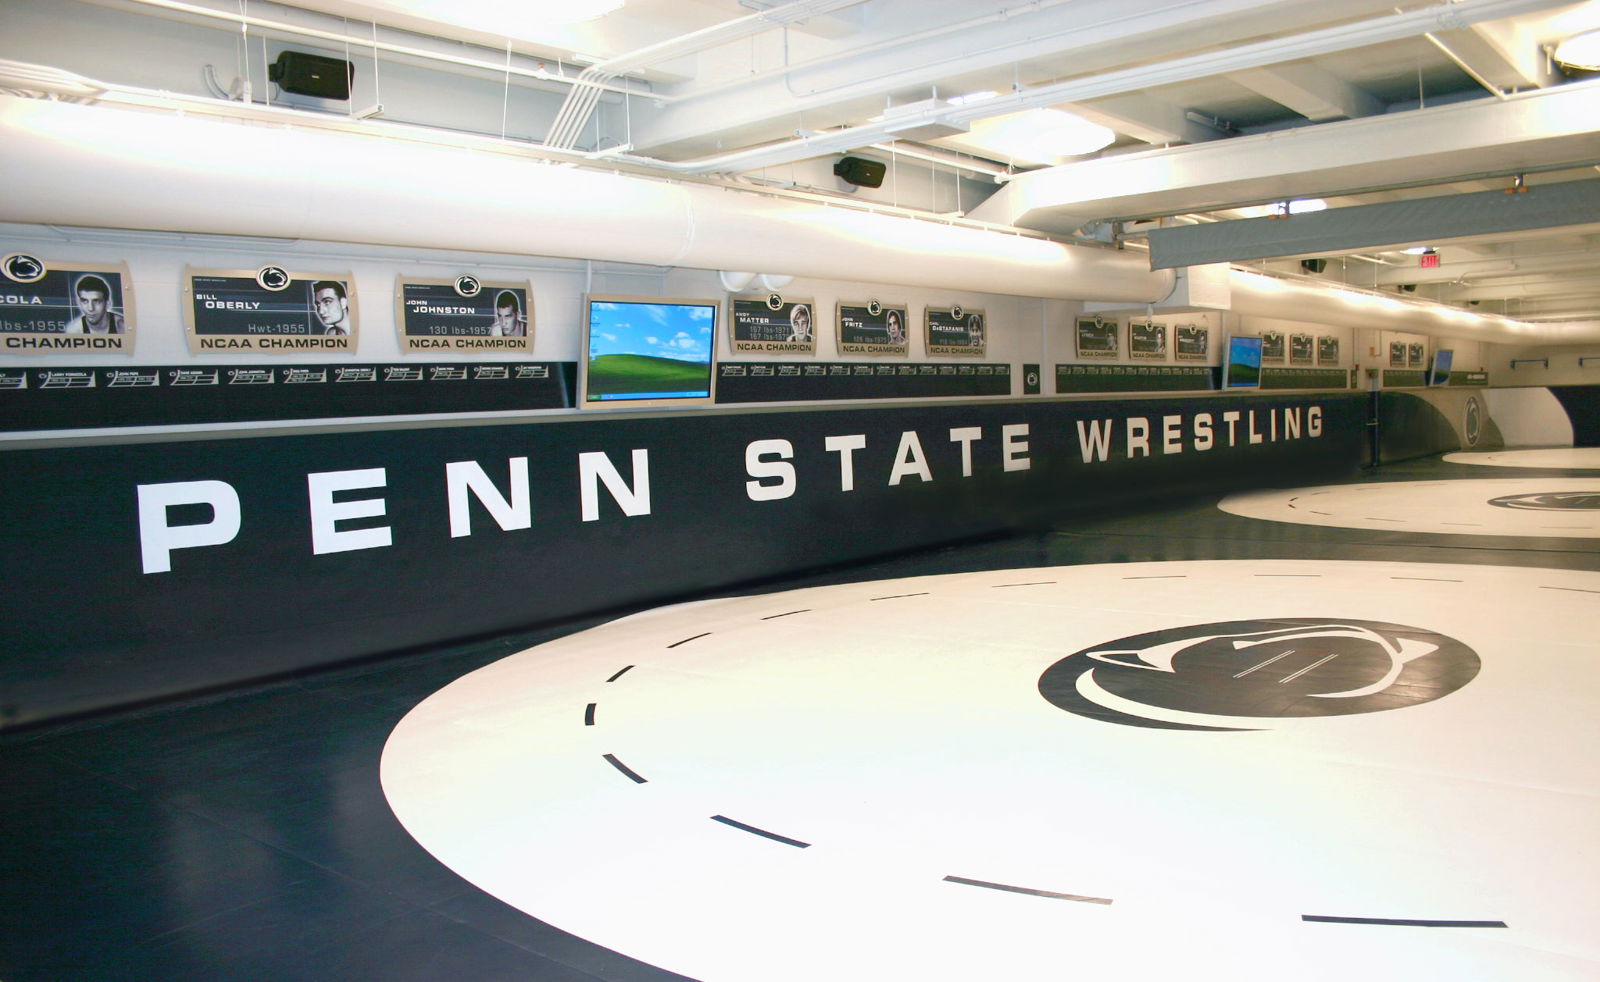 Classic Wrestling Mats Quote Request - Resilite Mats